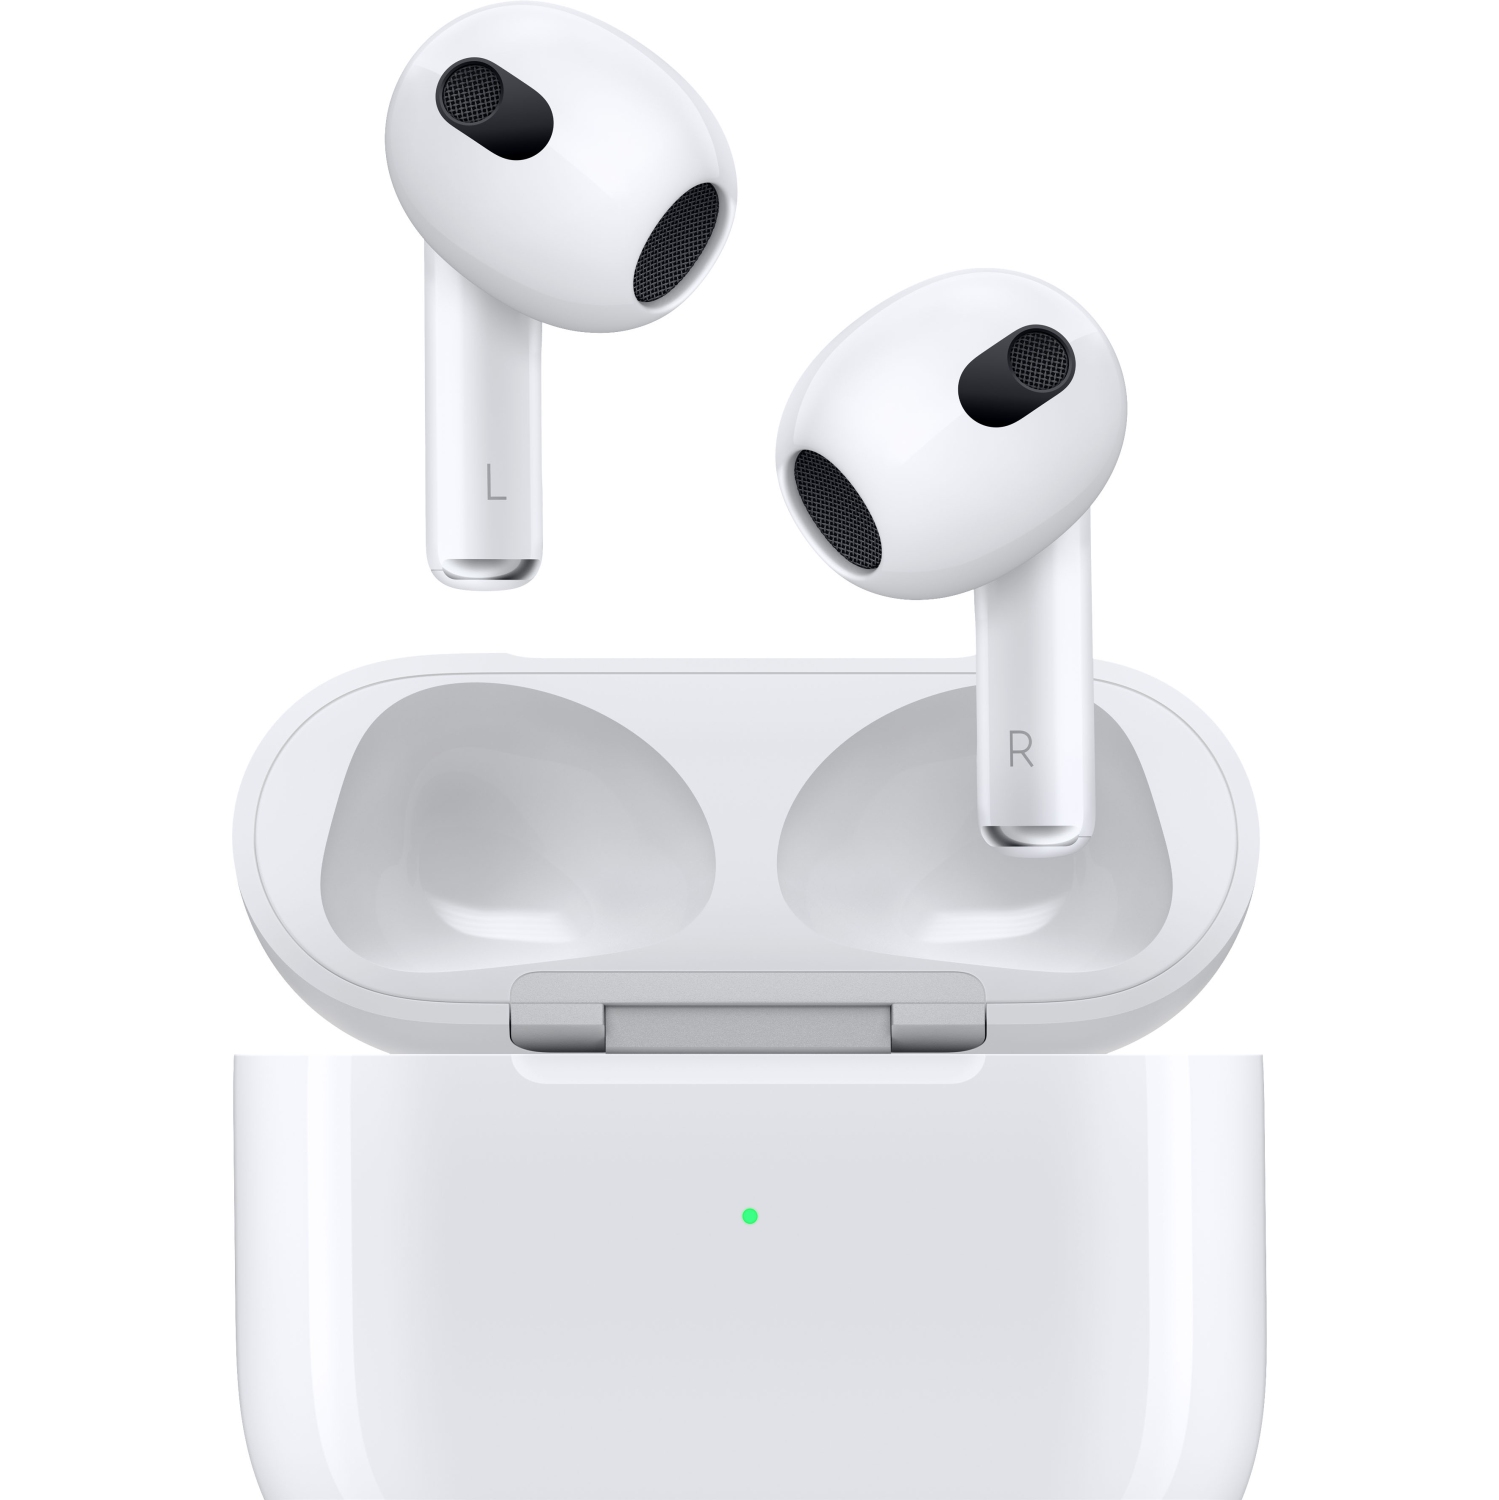 Open Box - Apple AirPods In-Ear True Wireless Earbuds (3rd Generation) with MagSafe Charging Case - White